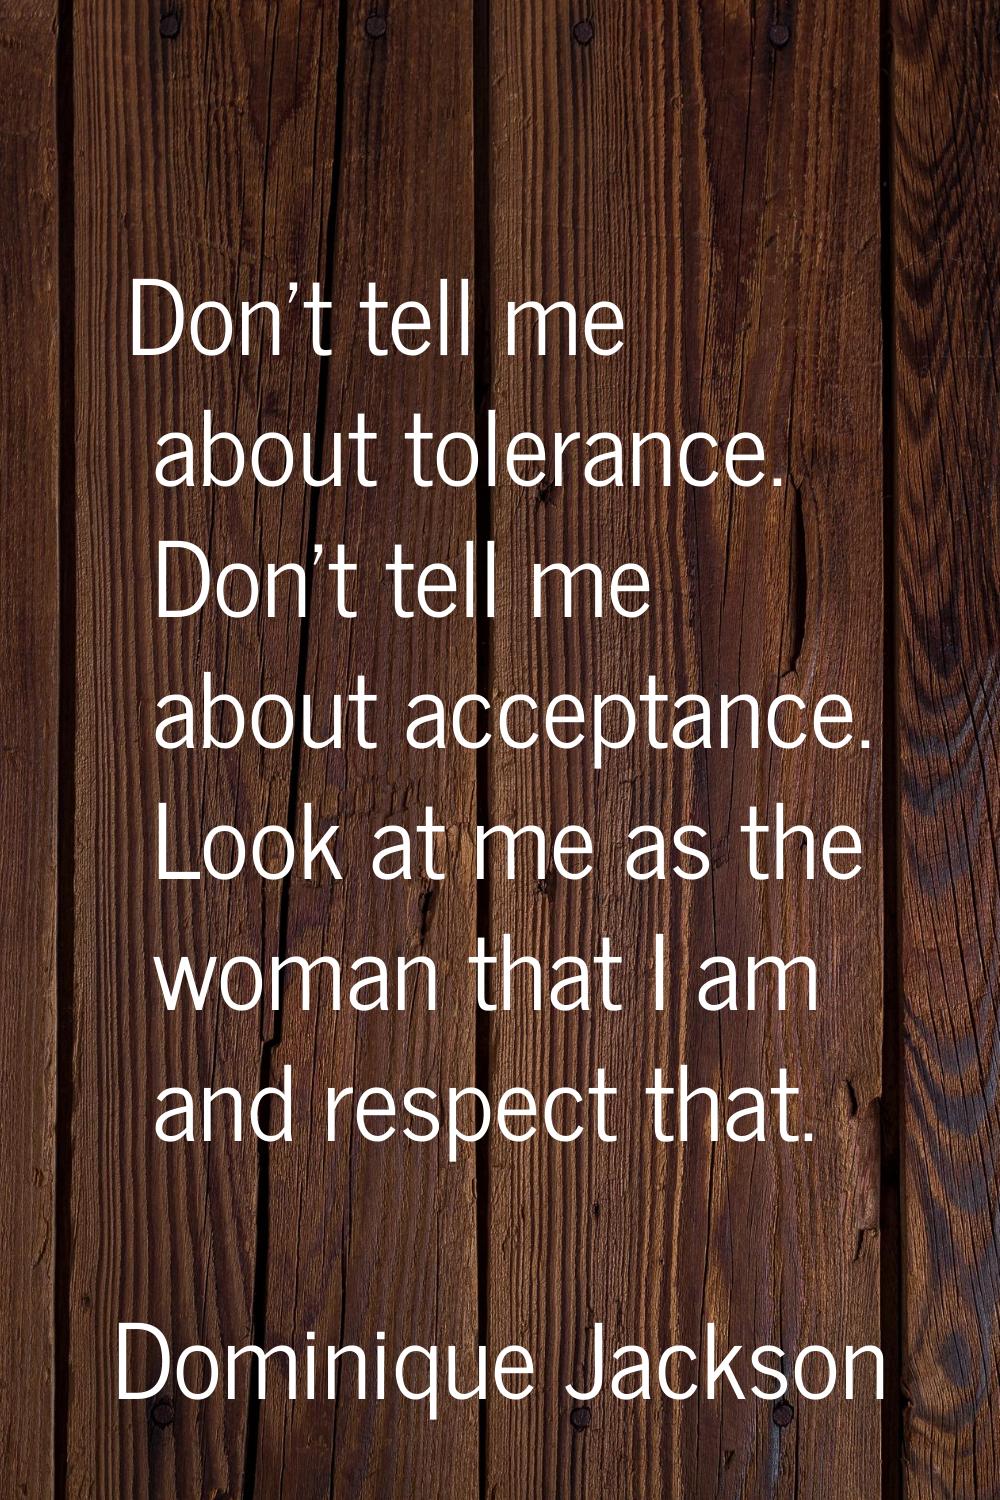 Don't tell me about tolerance. Don't tell me about acceptance. Look at me as the woman that I am an